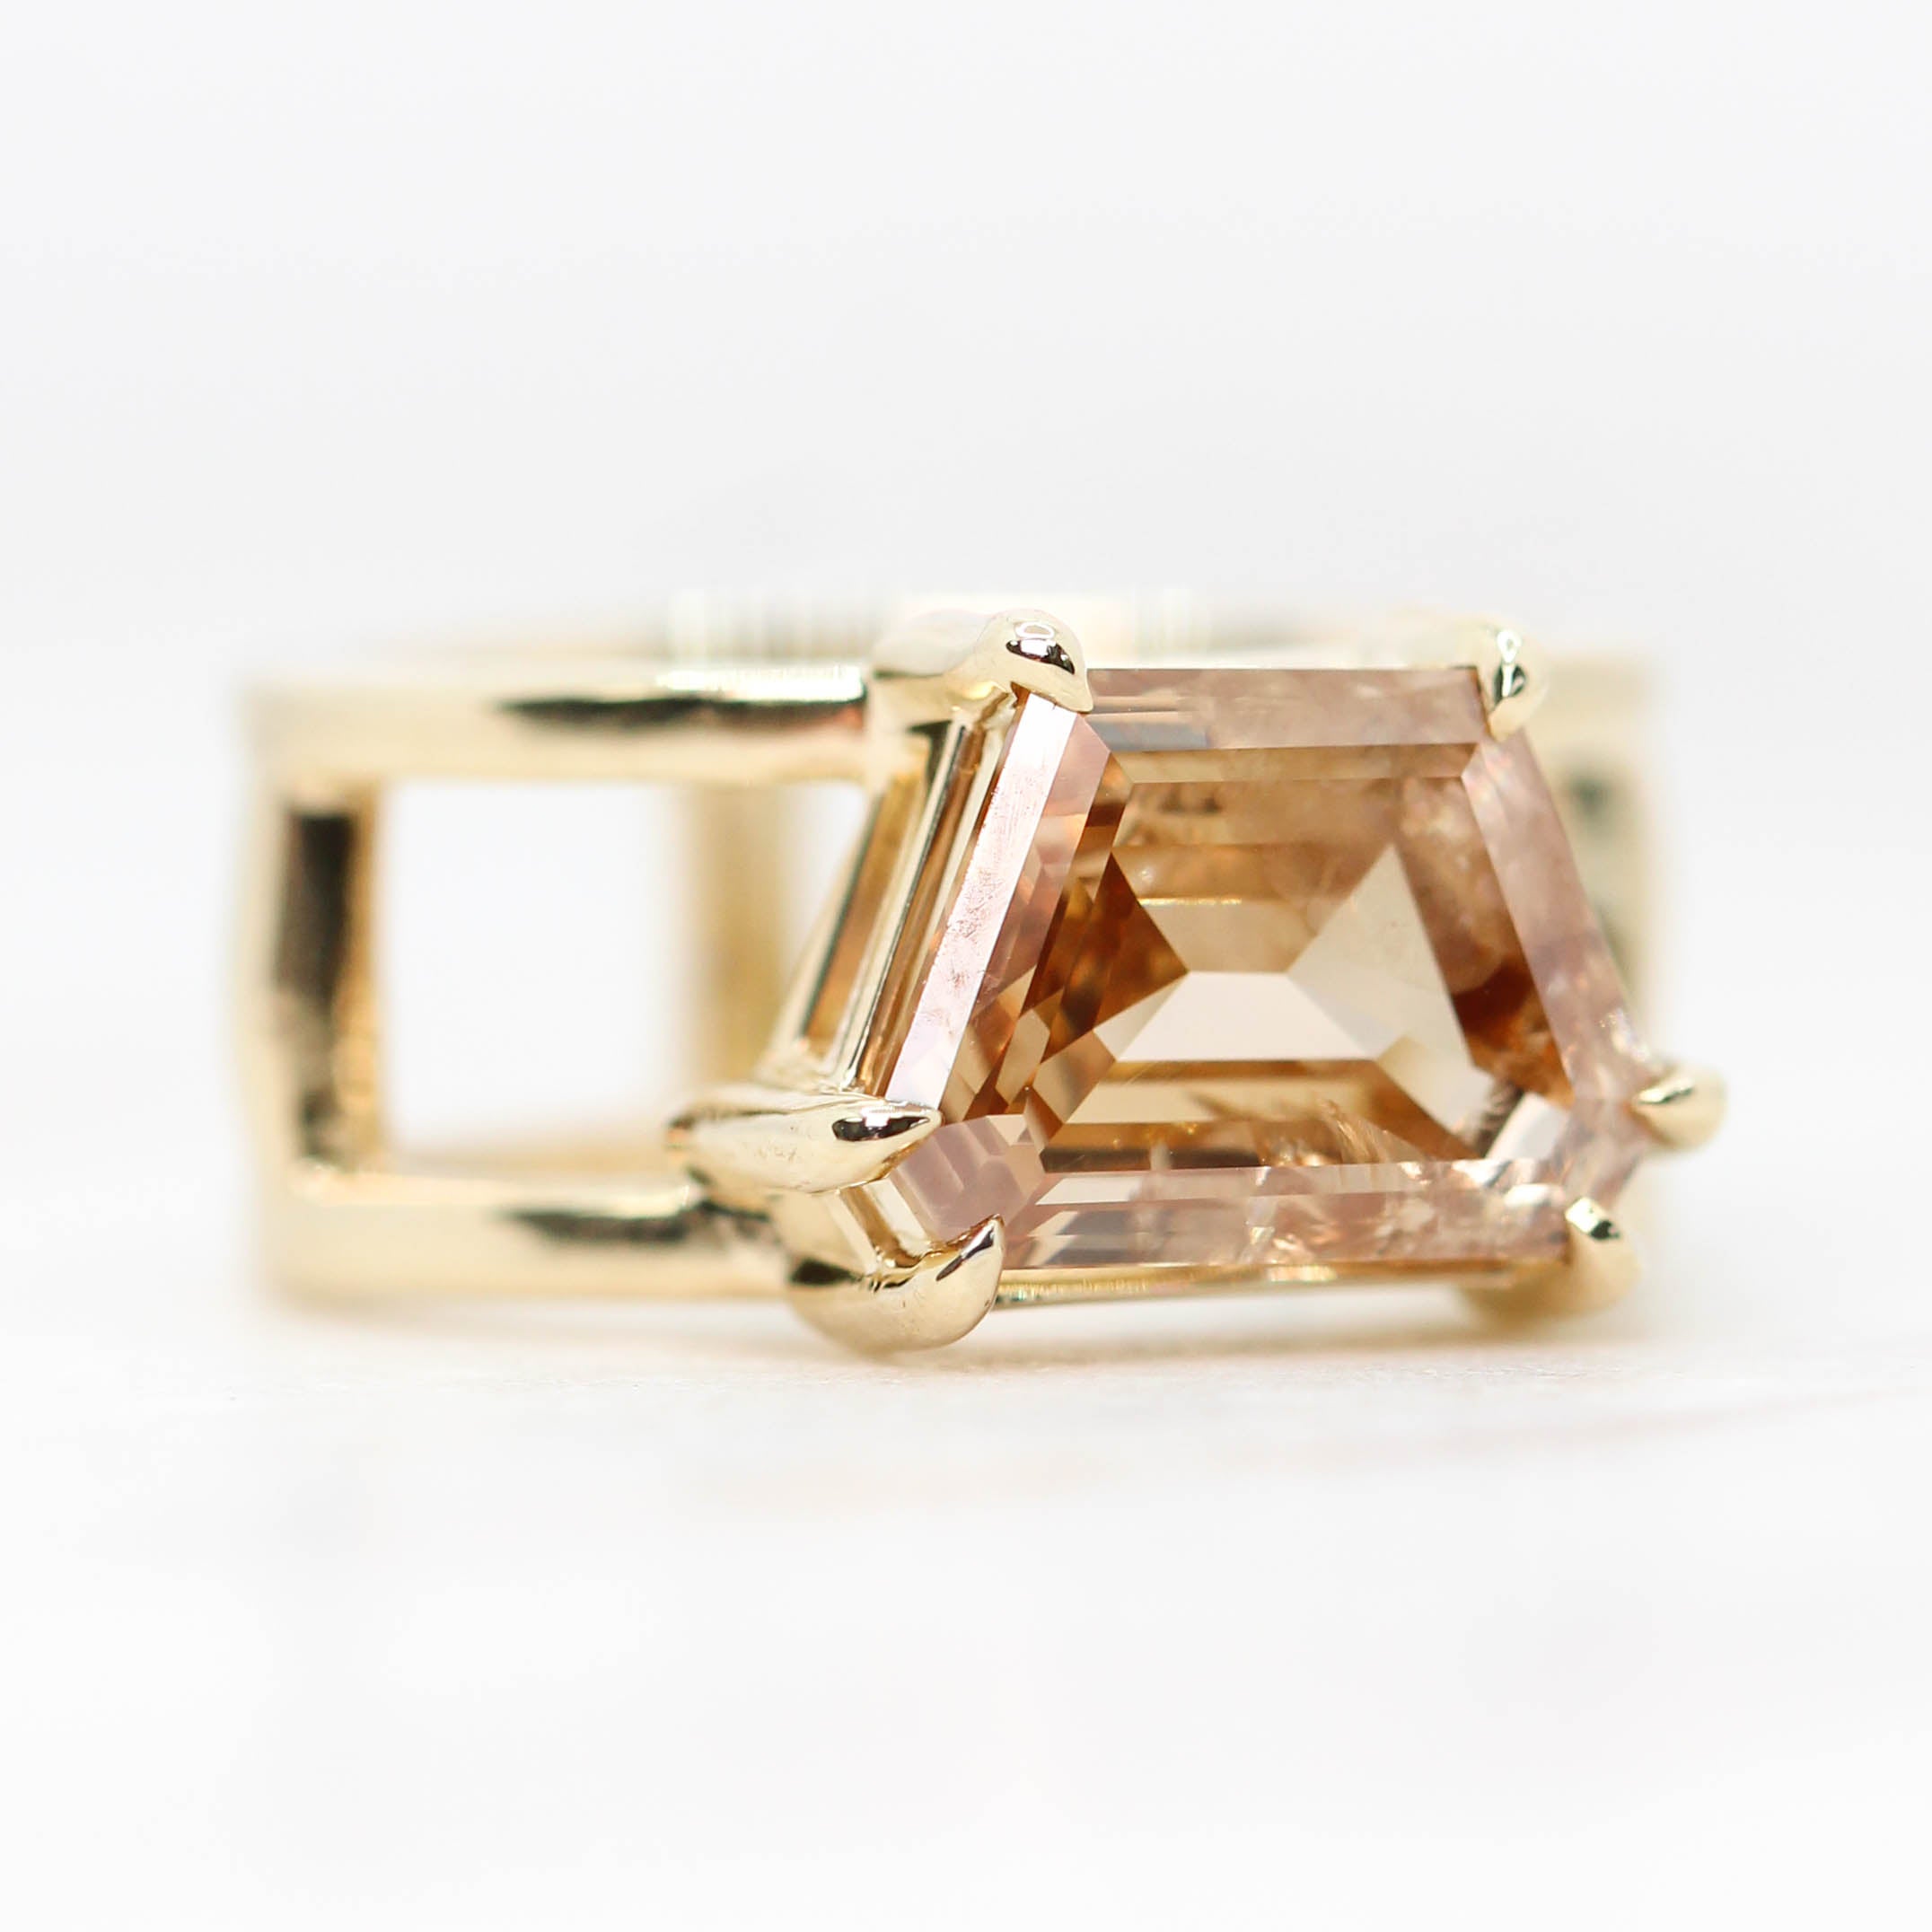 Marilyn Ring with a 3.70 Carat Champagne Trapezoid Diamond in 14k Yellow Gold - Ready to Size and Ship - Midwinter Co. Alternative Bridal Rings and Modern Fine Jewelry